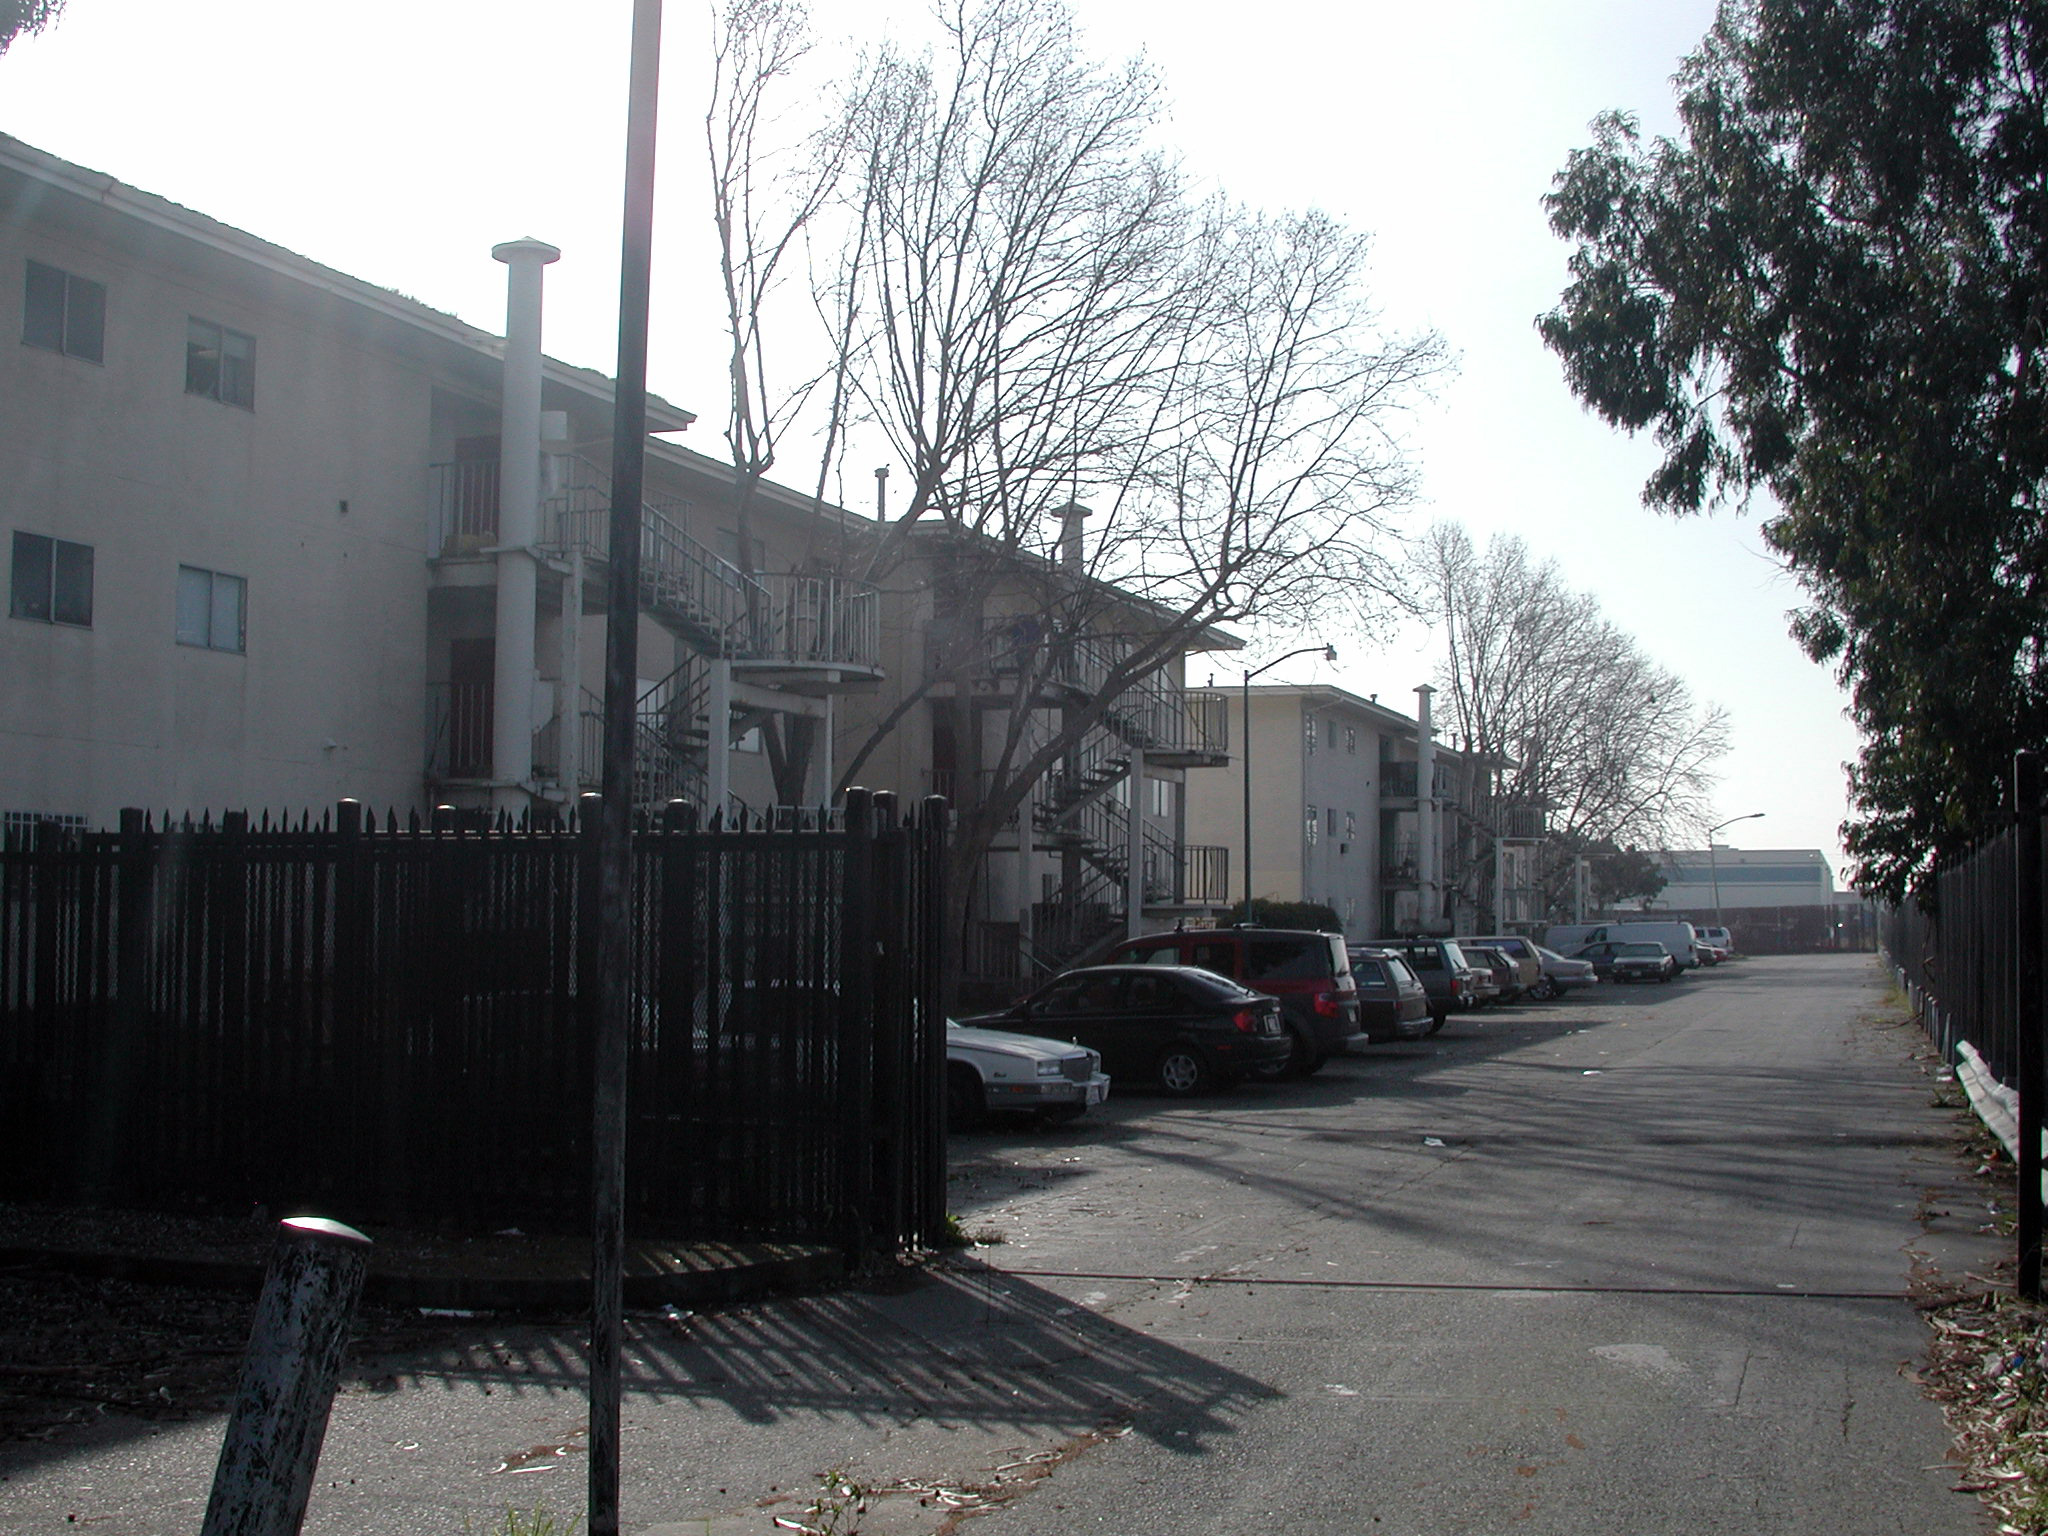 Decrepit units ready for demolition and replacement for Tassafaronga Village in East Oakland, CA.